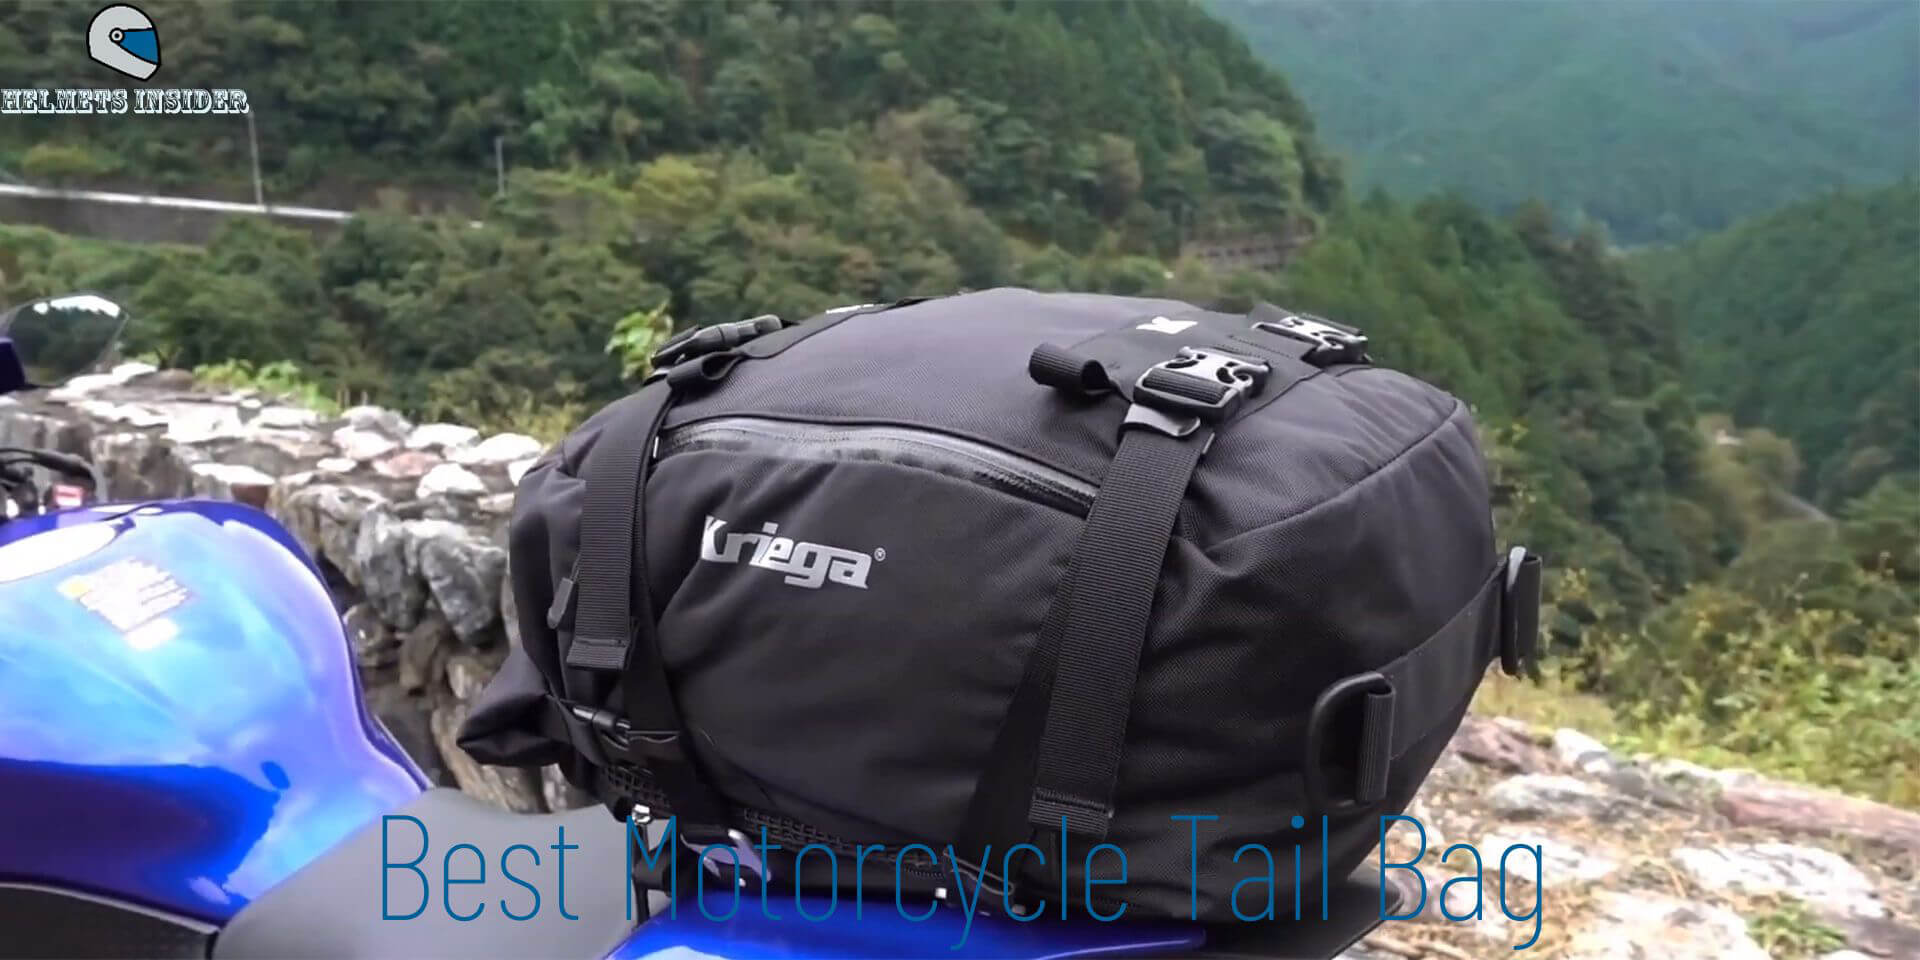 Best motorcycle tail bag